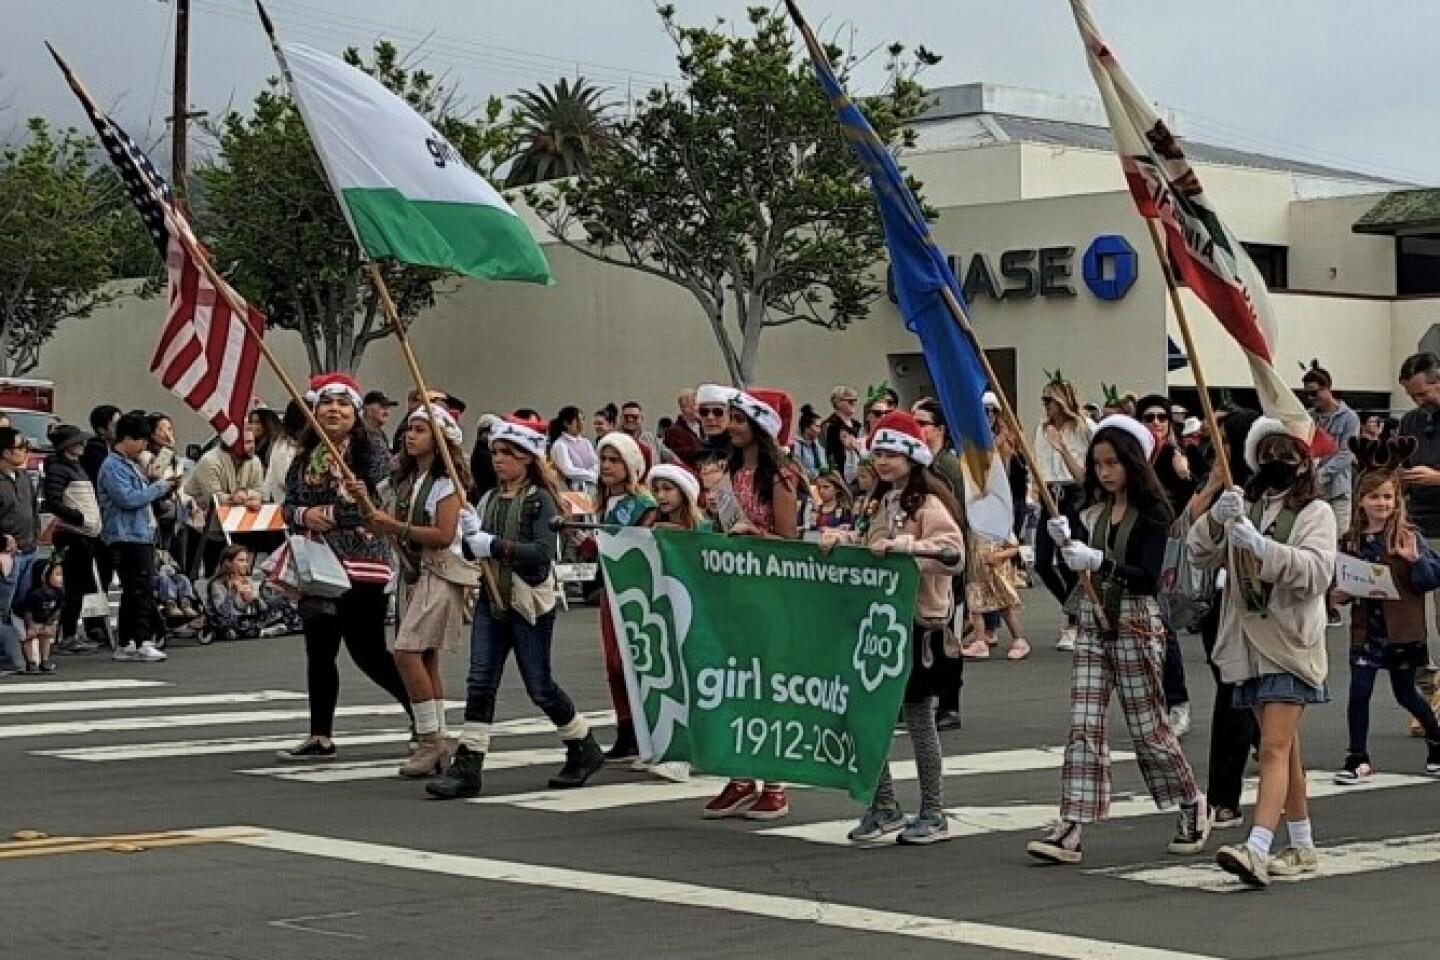 Girls Scouts in parade.jpg